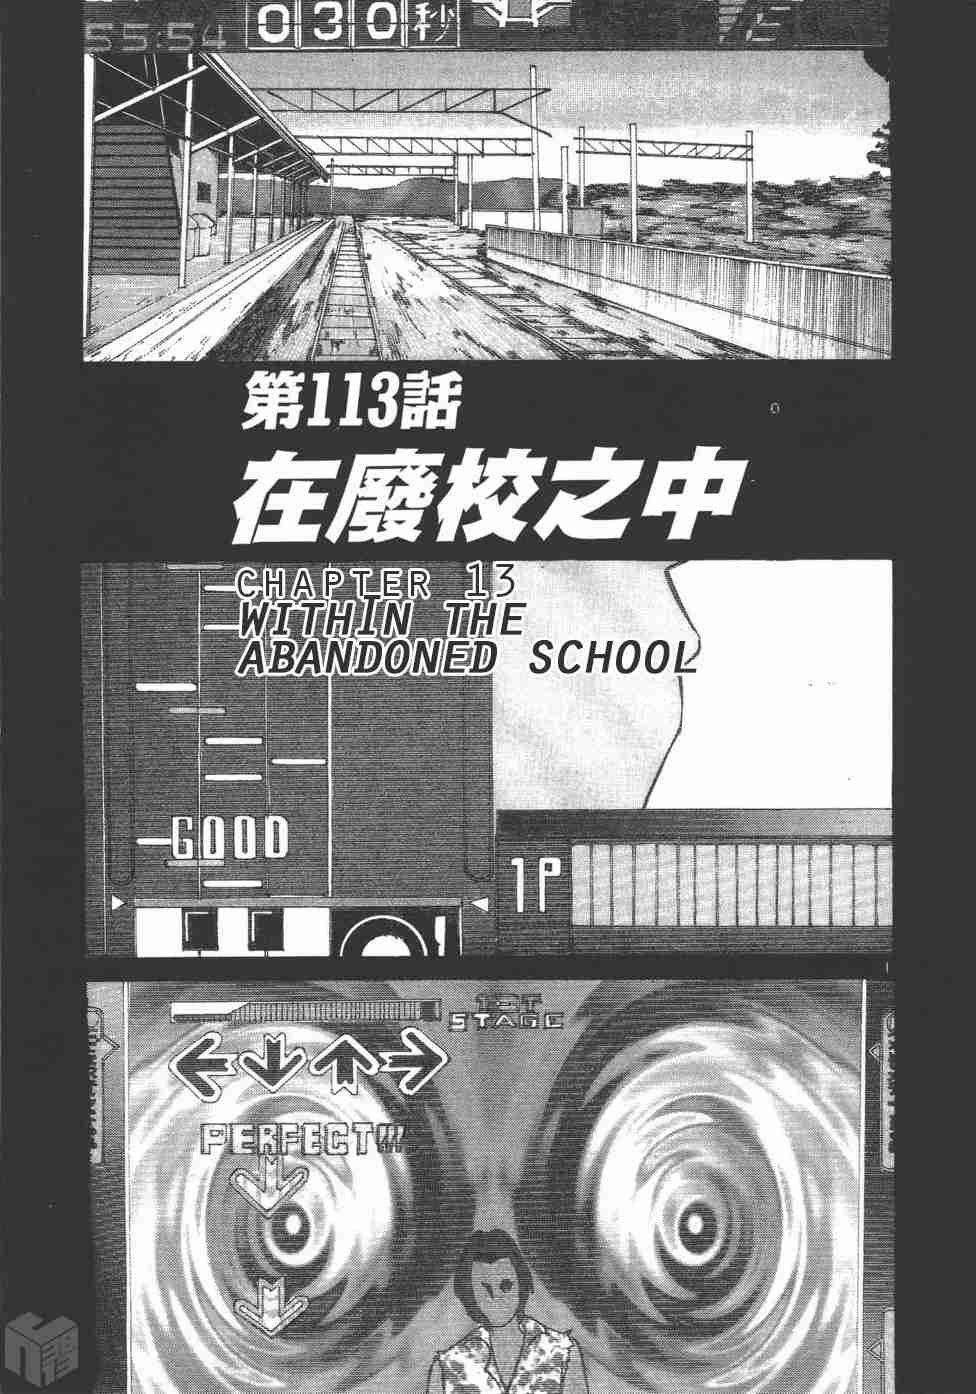 Over Rev! Vol. 10 Ch. 113 Within the Abandoned School